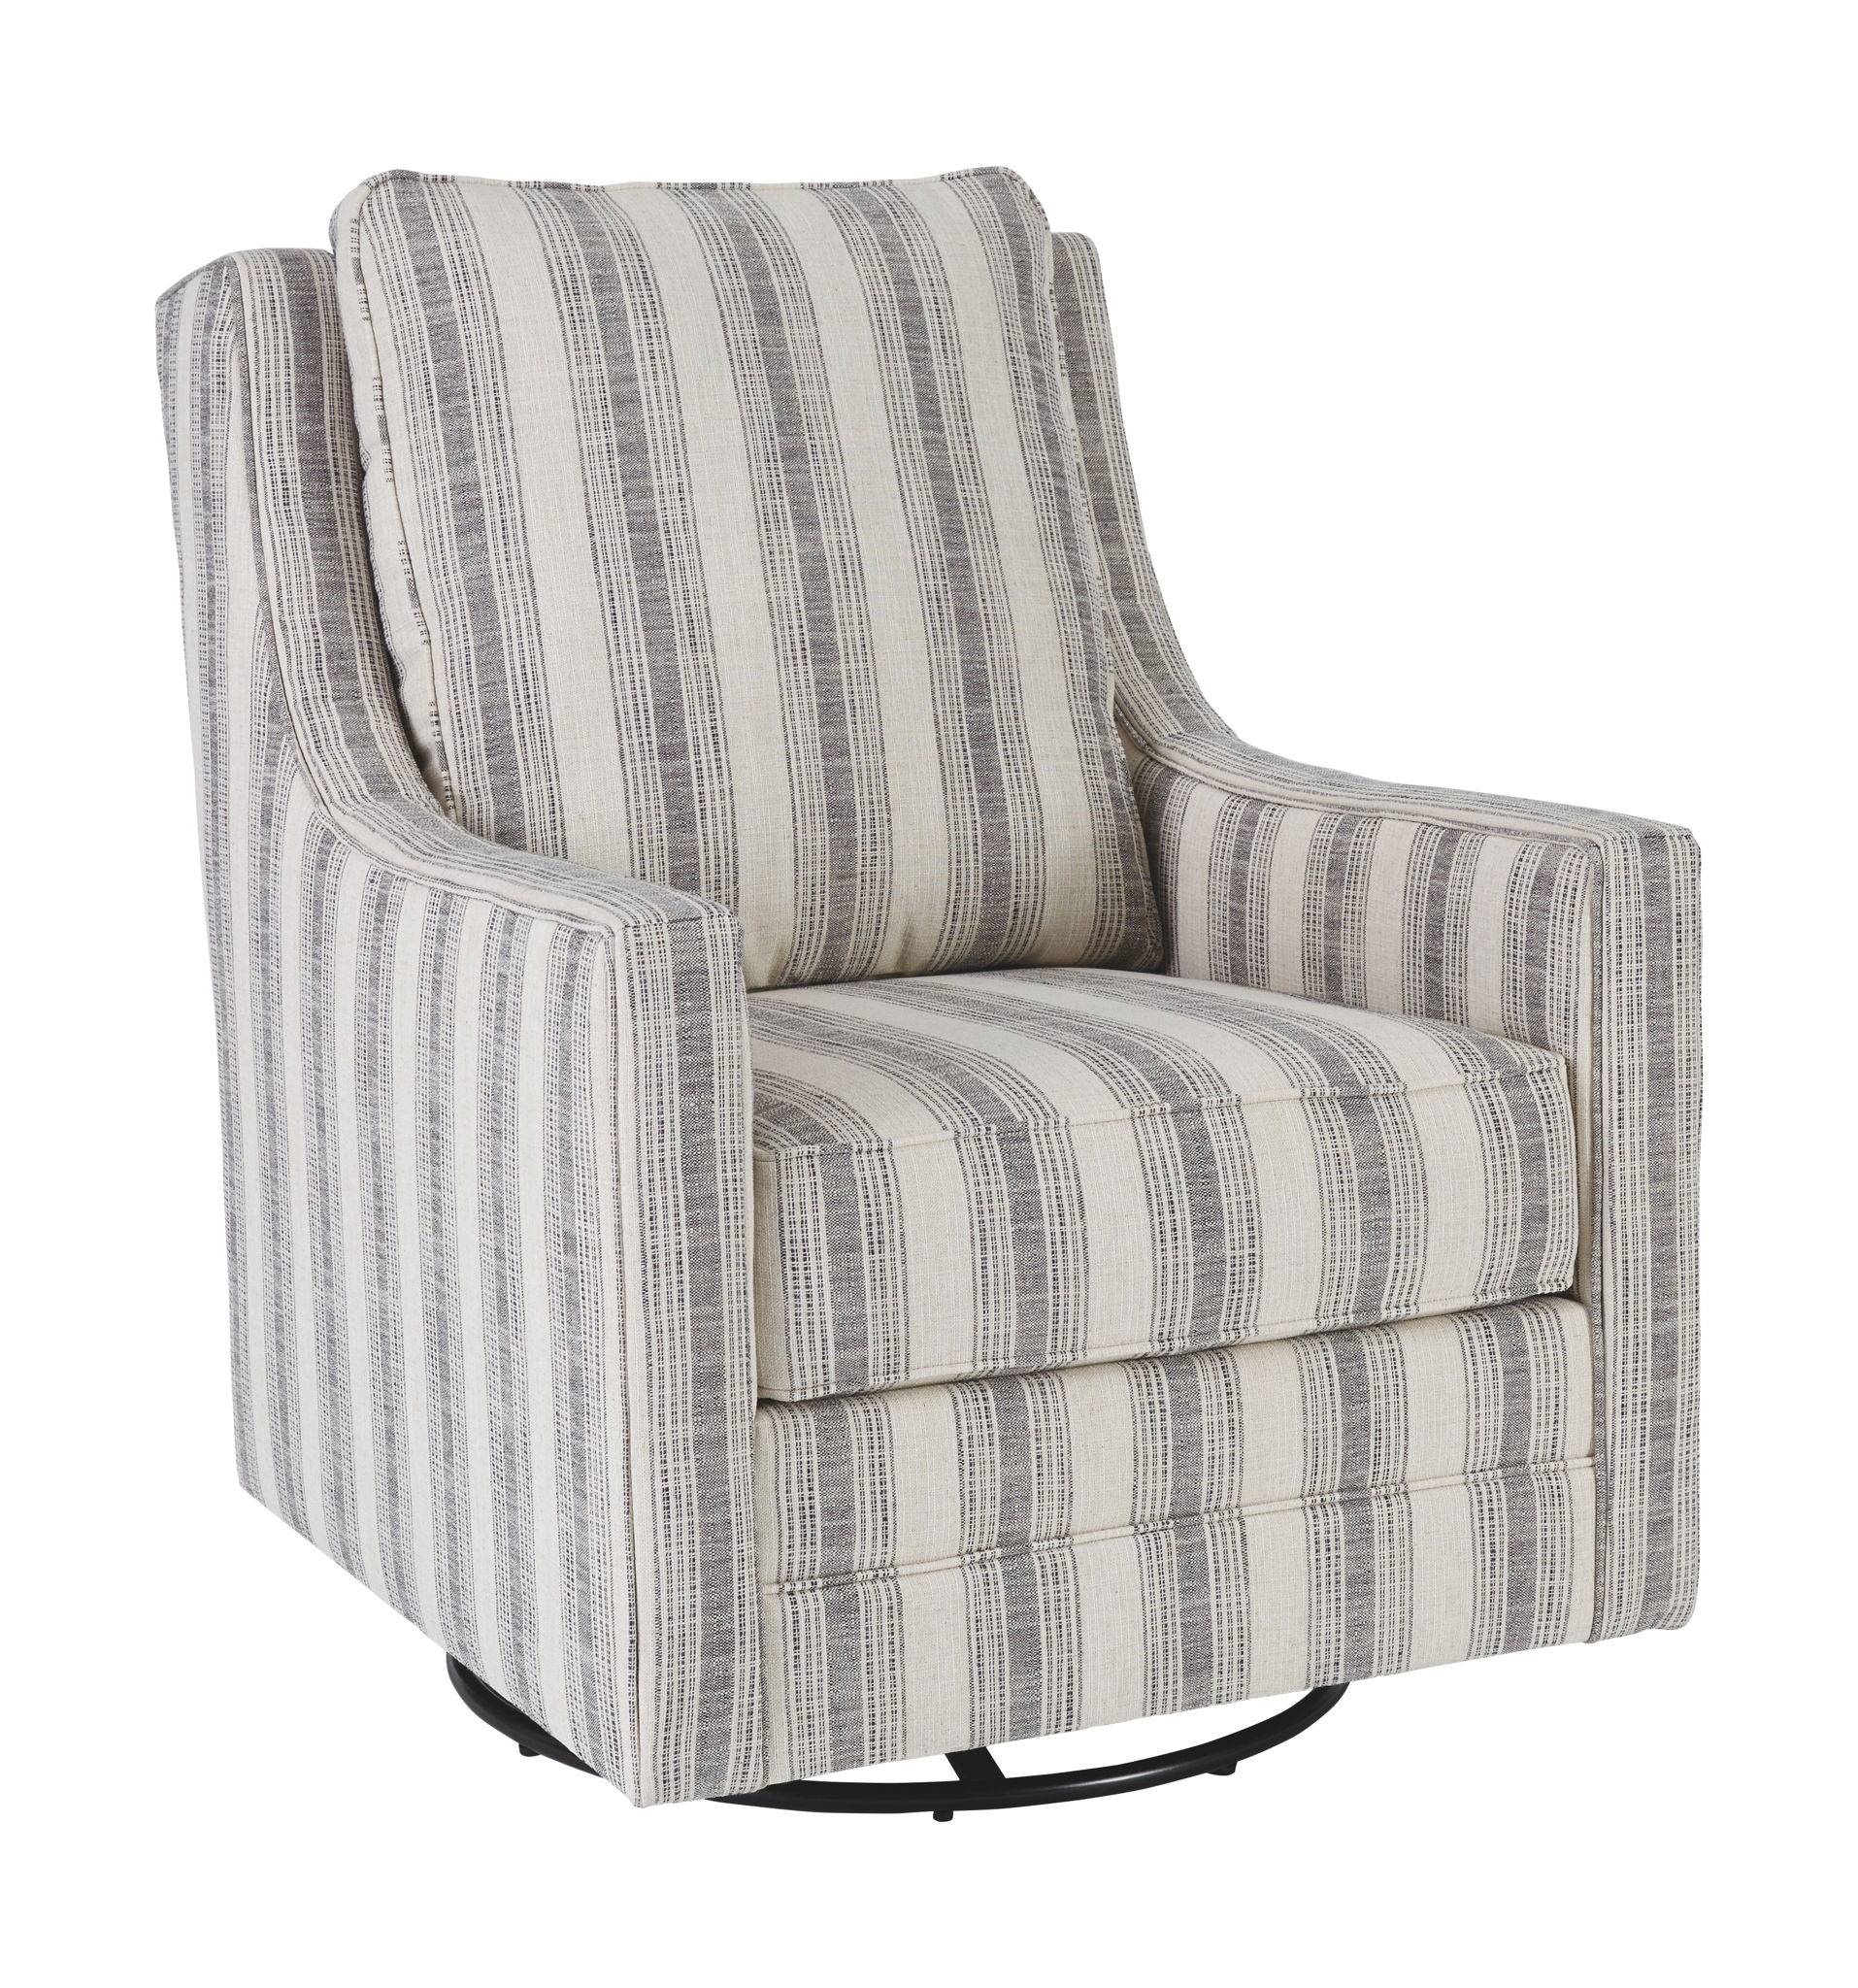 Kambria Ivory/Black Swivel Glider Accent Chair